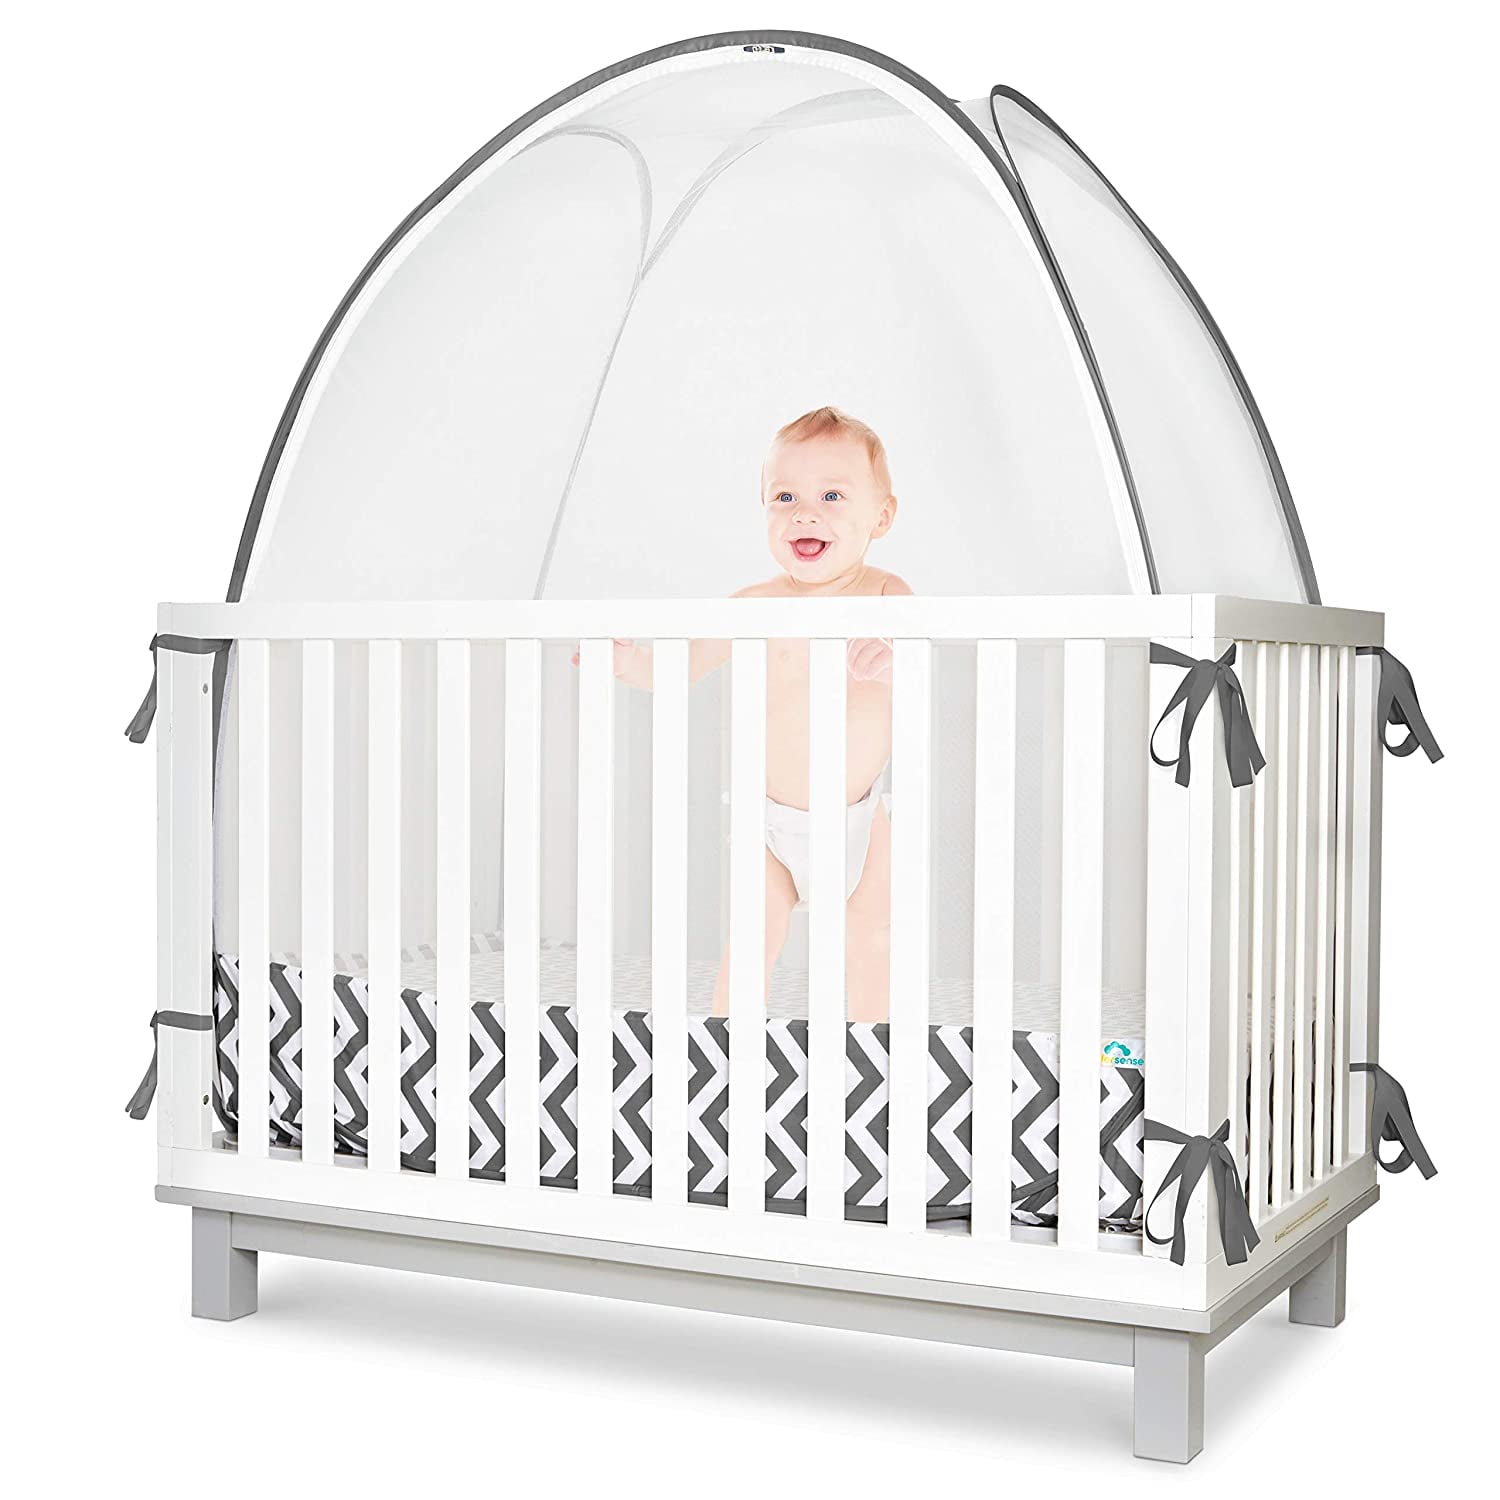 WLCN02A SDADI Baby Crib Safety Tent Pop Up Mosquito Net with Baby Monitor Hang Ribbon,Toddler Bed Canopy Netting Cover